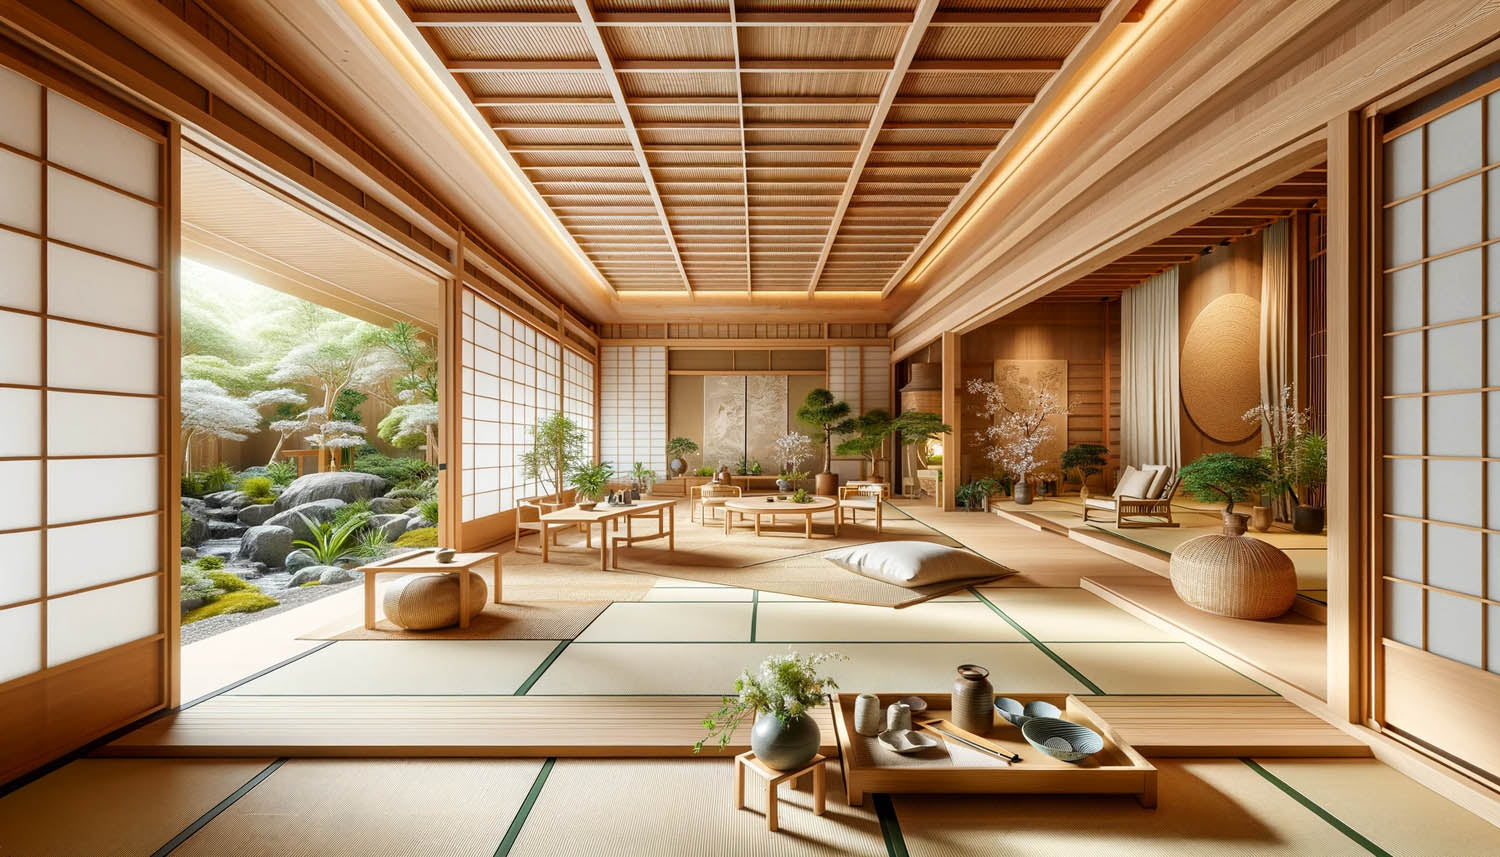 Modern Japanese Interior Design in 2023: Color Schemes, Concept, Materials